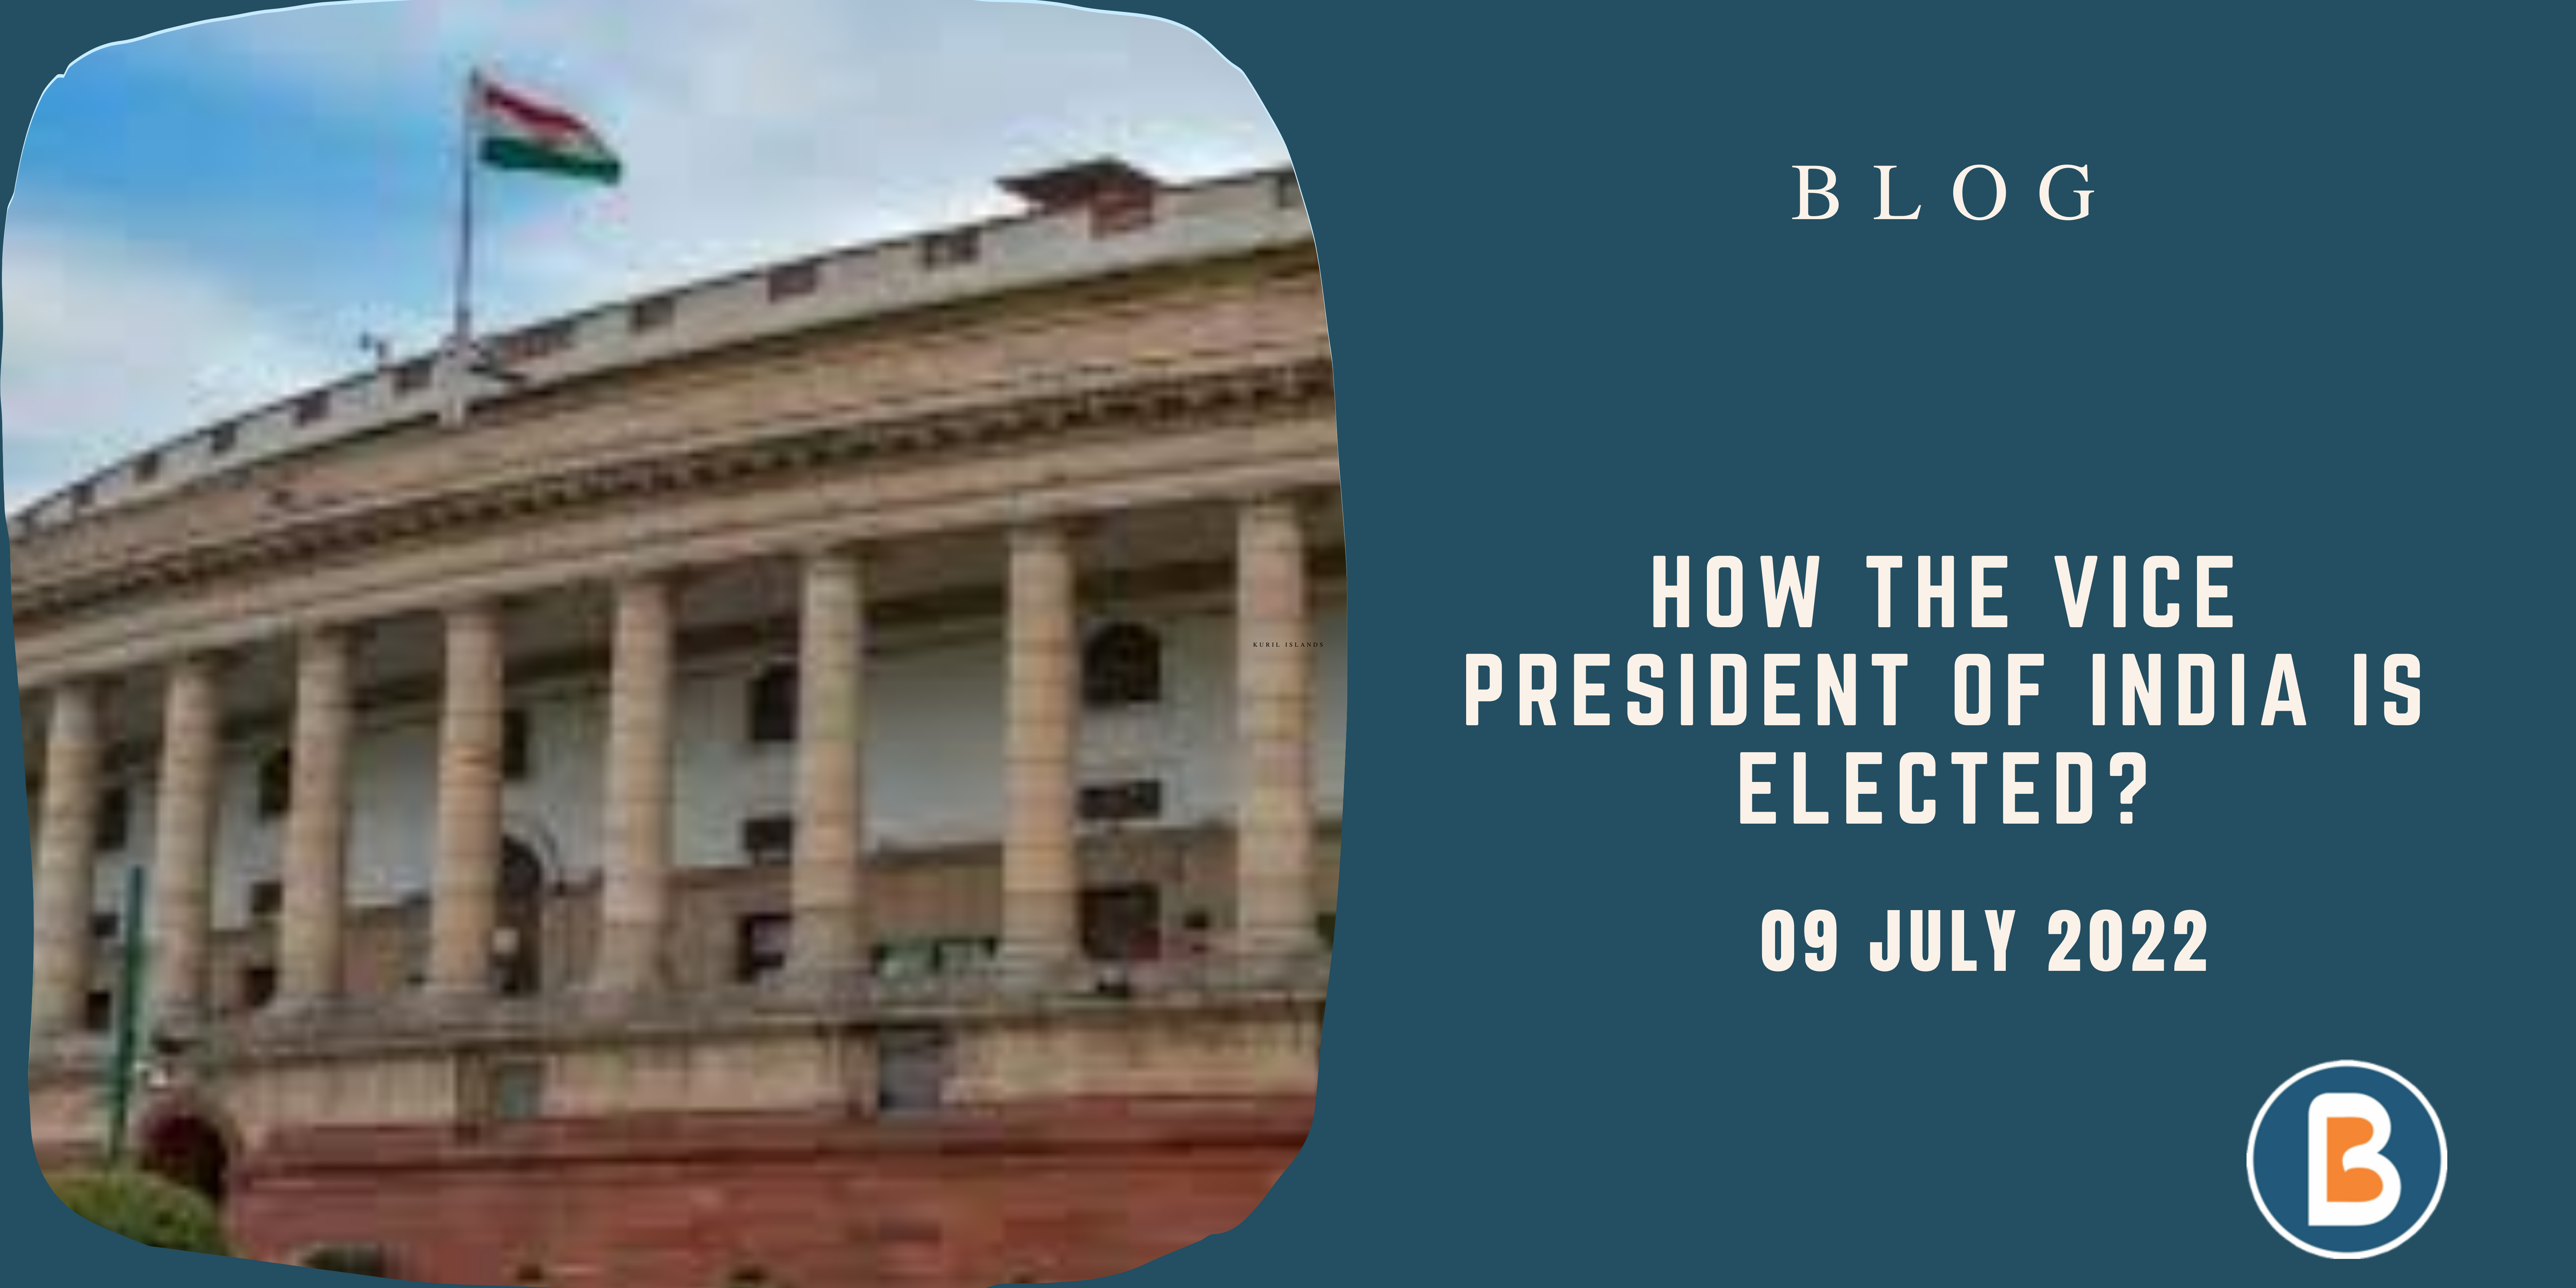 Editorial Analysis for IAS - How the Vice President of India is elected?